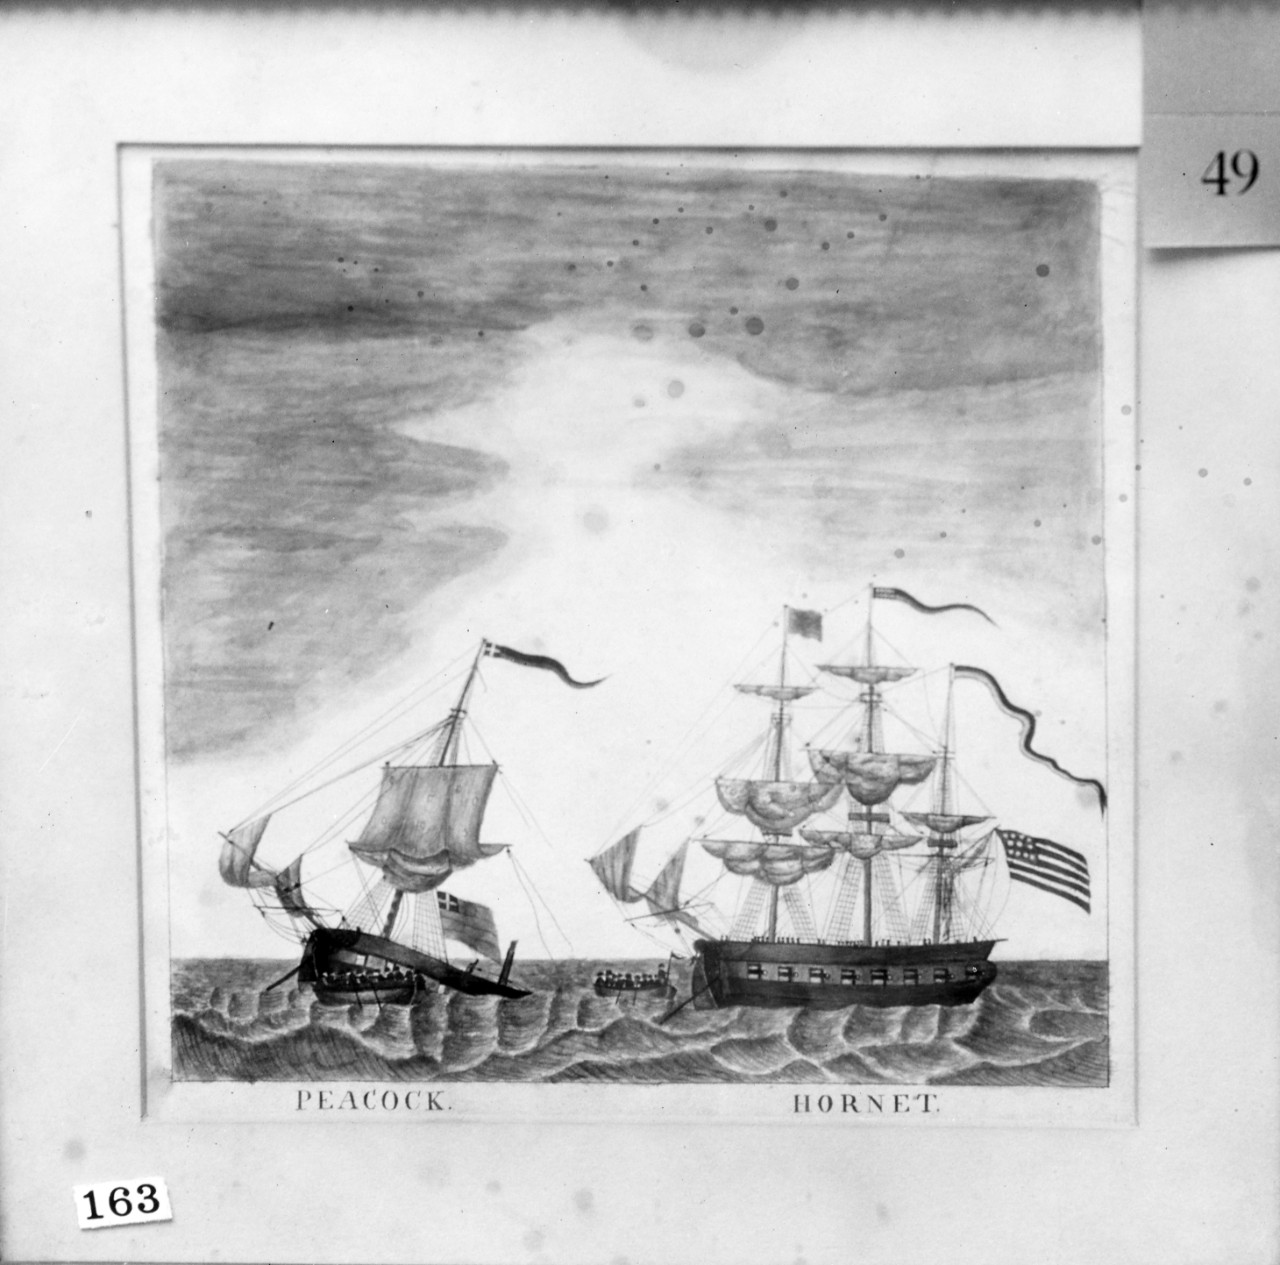 Photo #: NH 1167  Action between USS Hornet and HMS Peacock, 24 February 1813